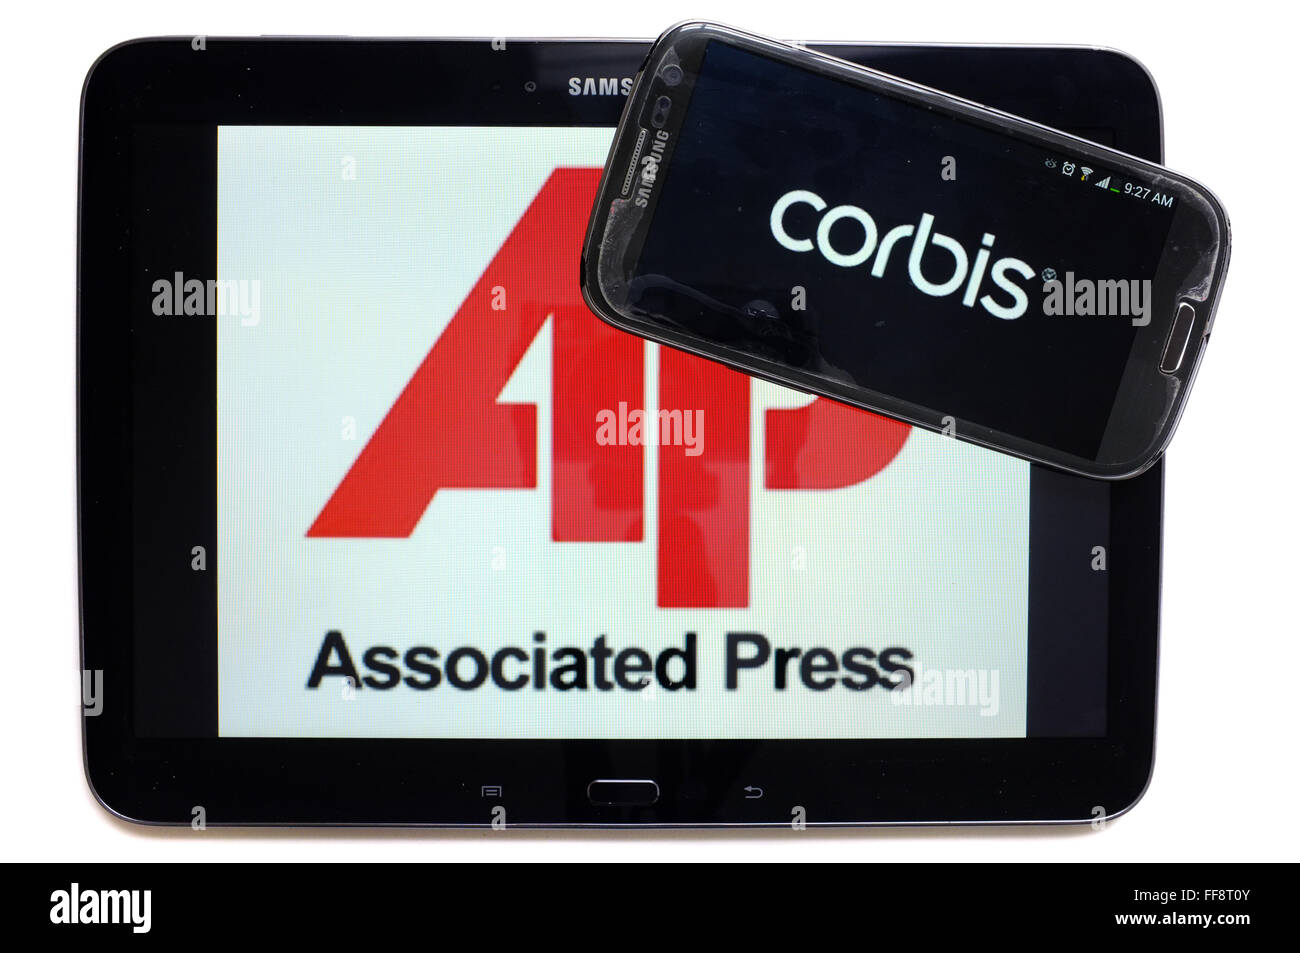 The news agencies AP and Corbis on the screens of a tablet and a smartphone photographed against a white background. Stock Photo